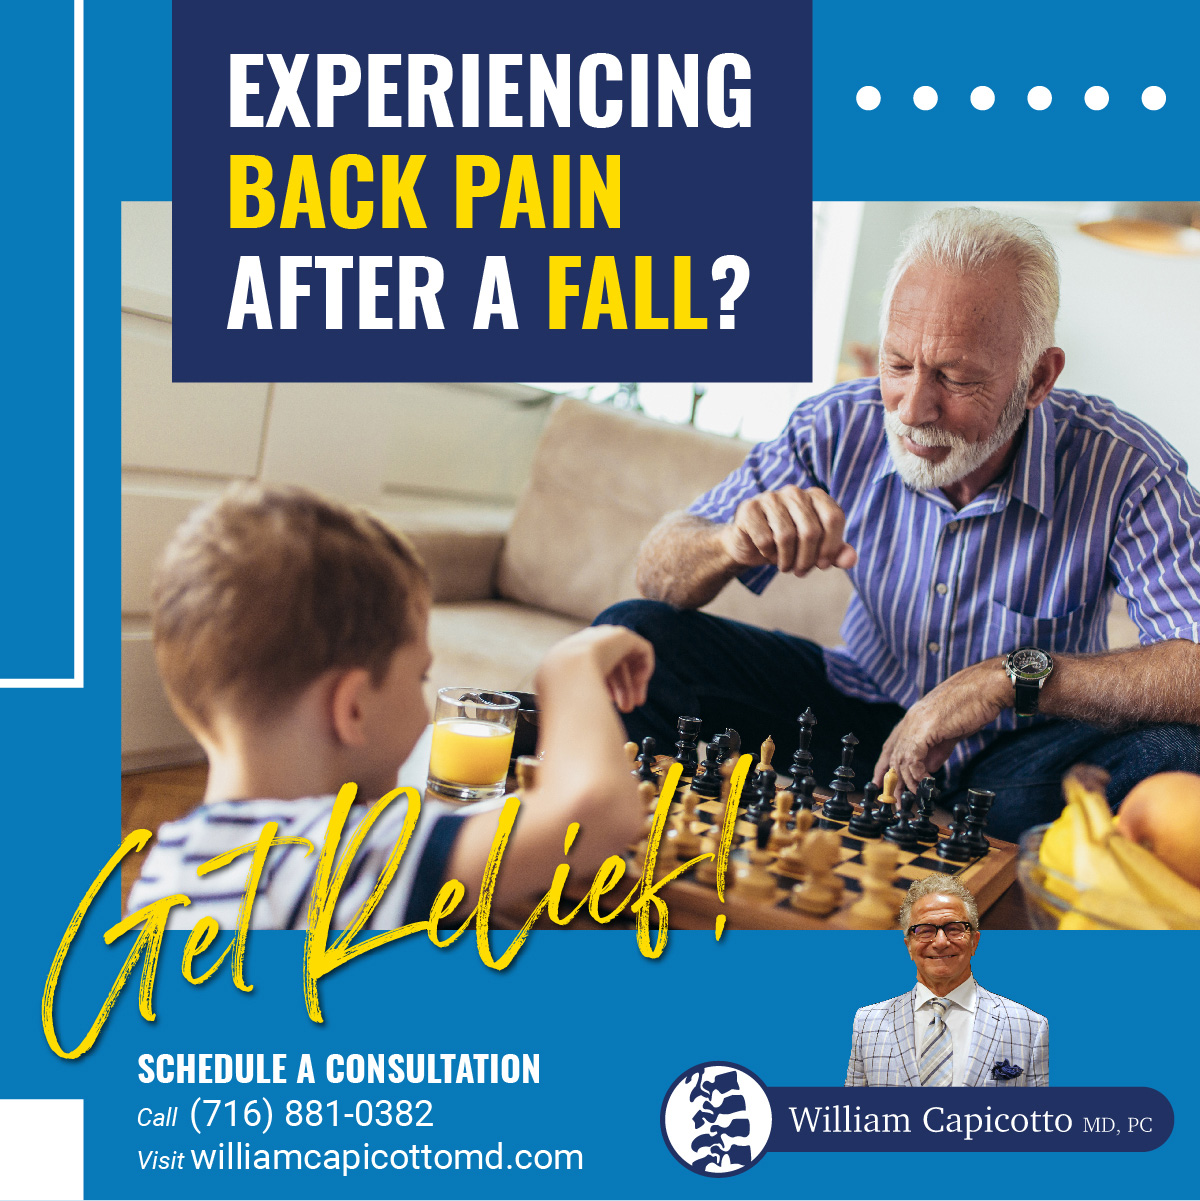 Experiencing back pain after a fall? William Capicotto MD offers surgical and non-surgical treatments to remedy back pain and spine injuries.